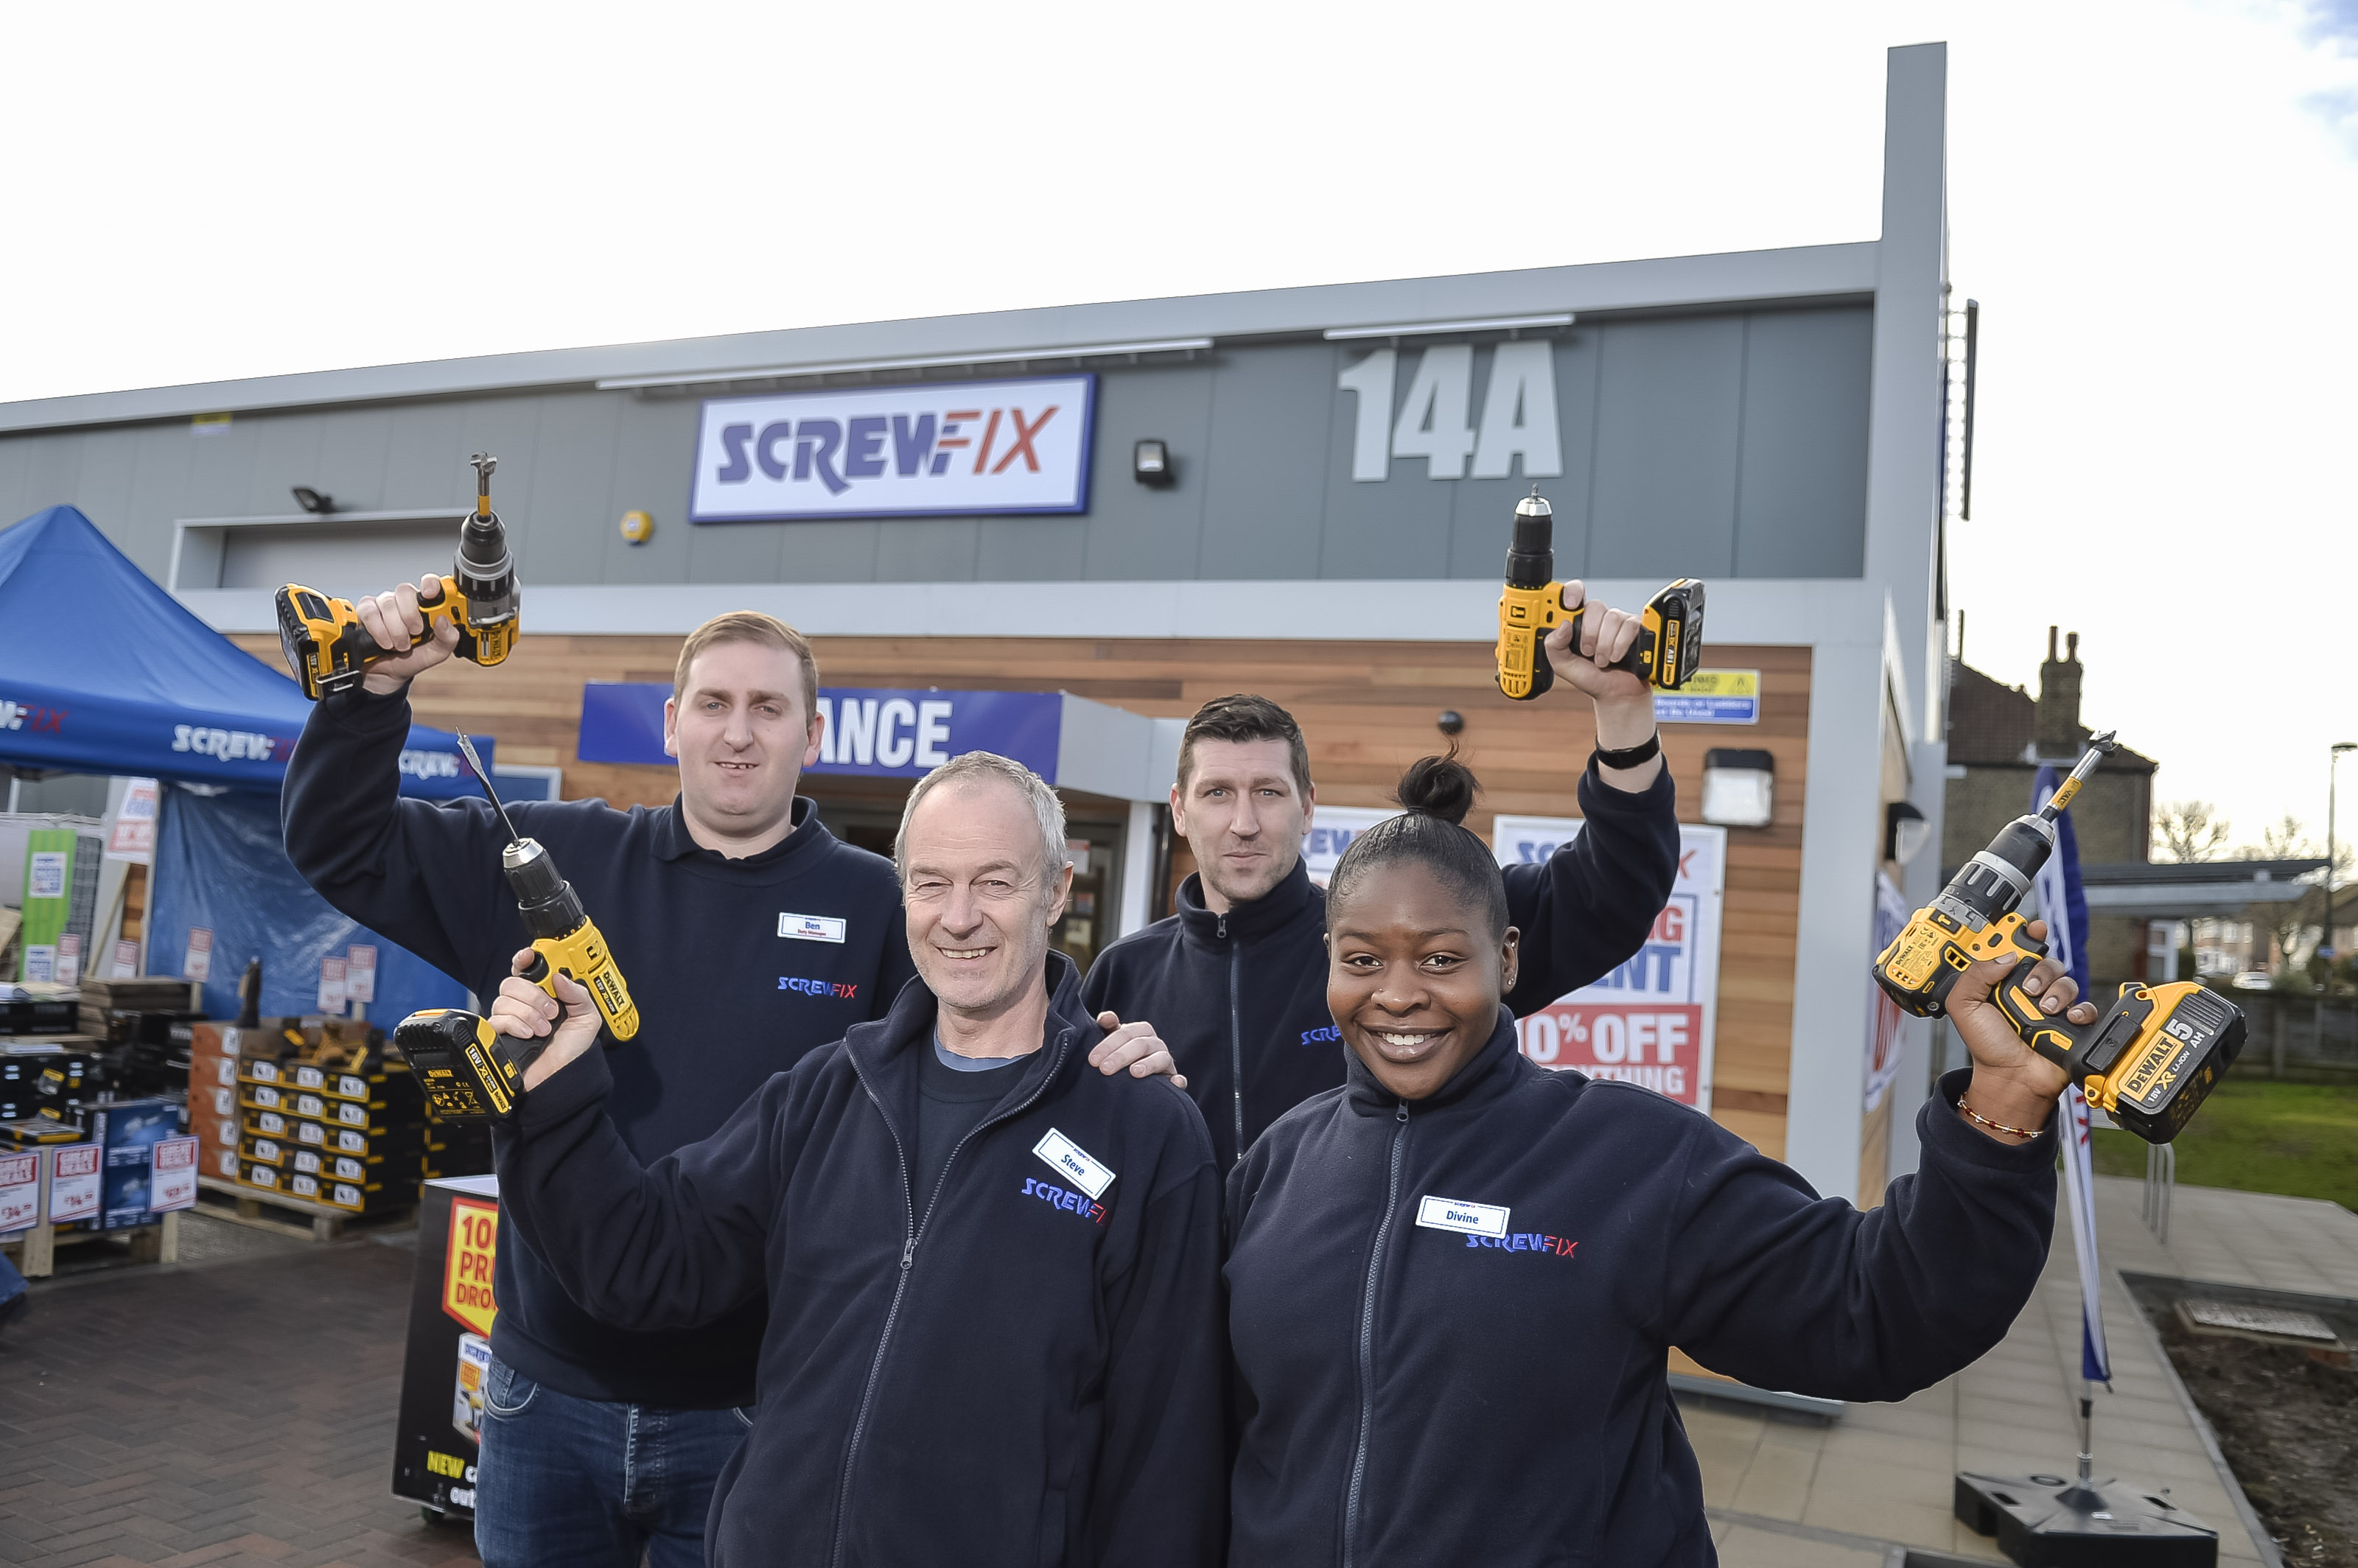 Screwfix opens its doors in Hither Green